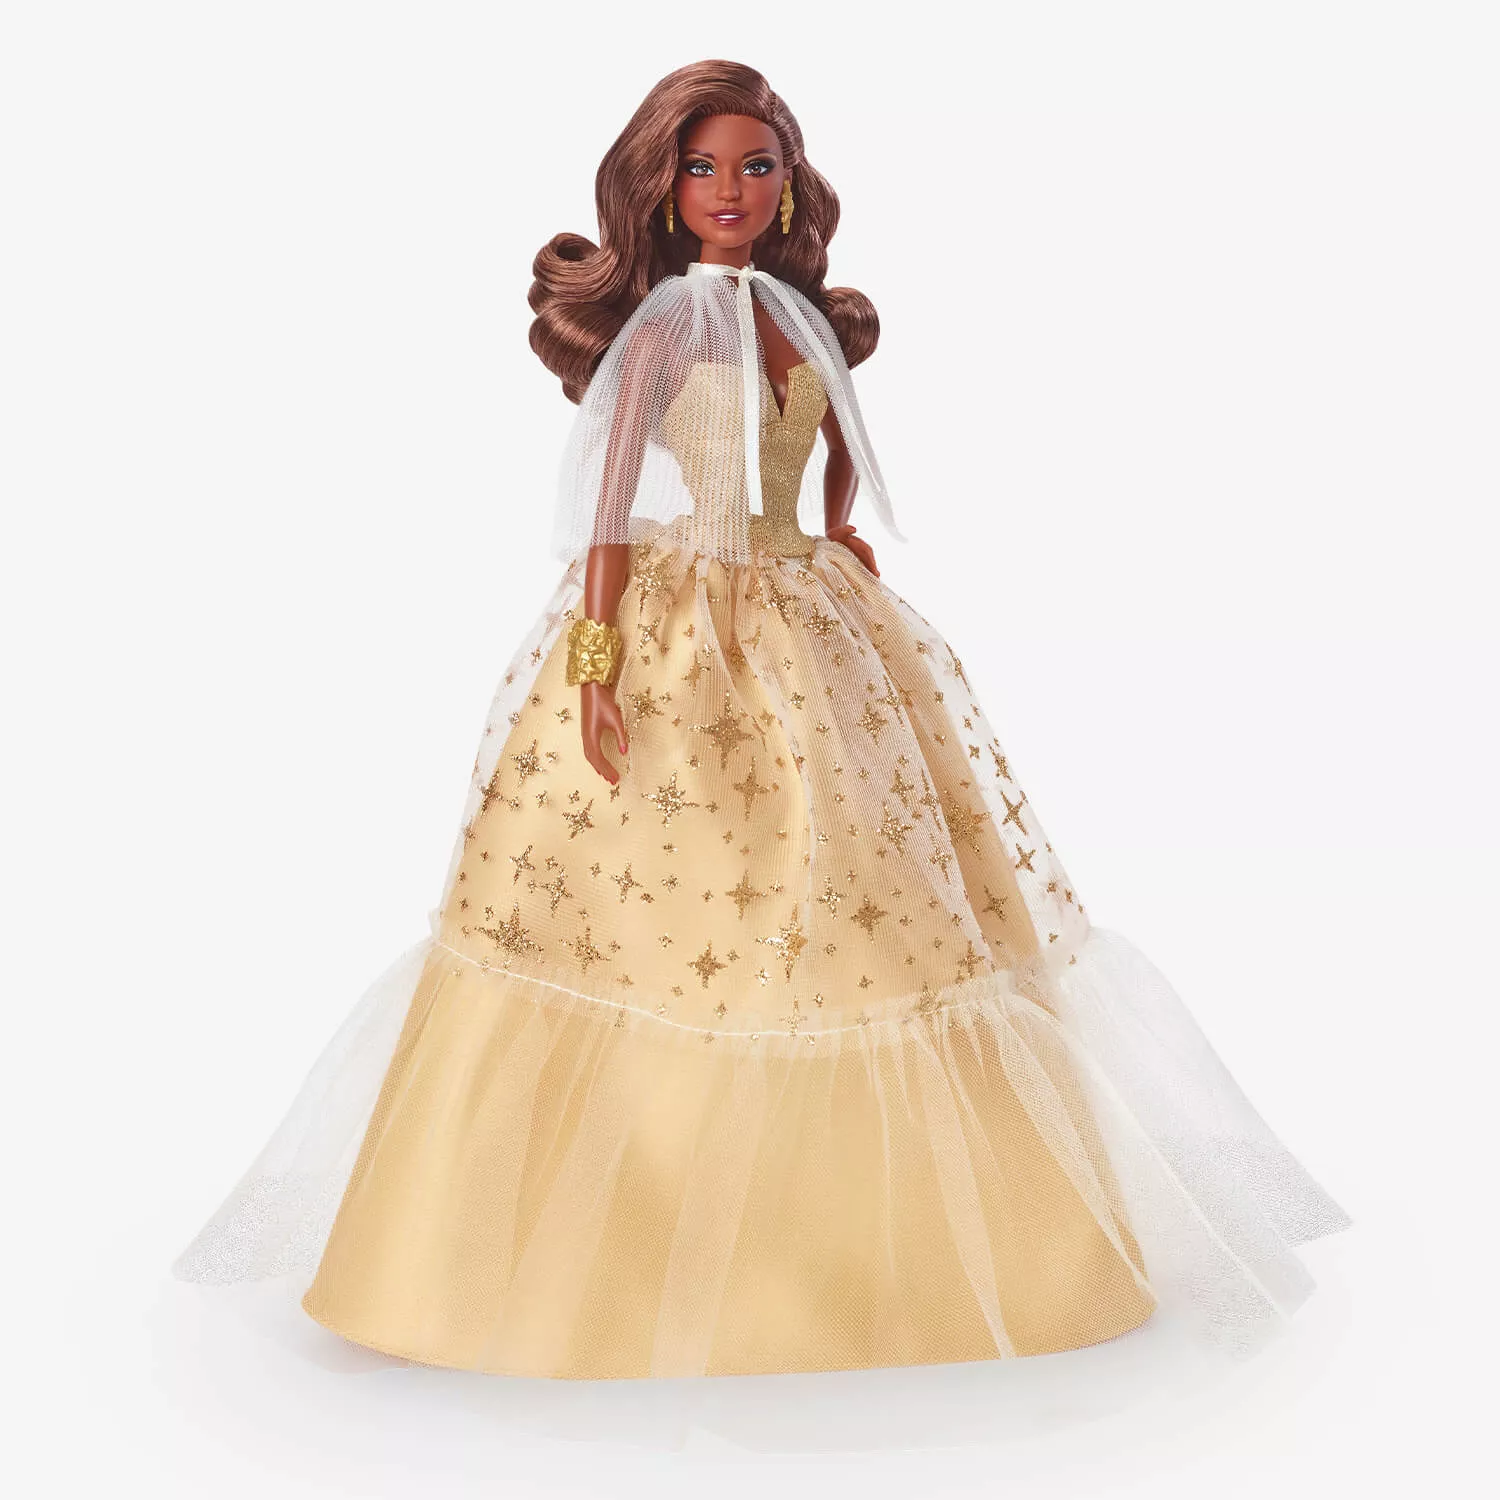 Barbie Signature Holiday Doll 2